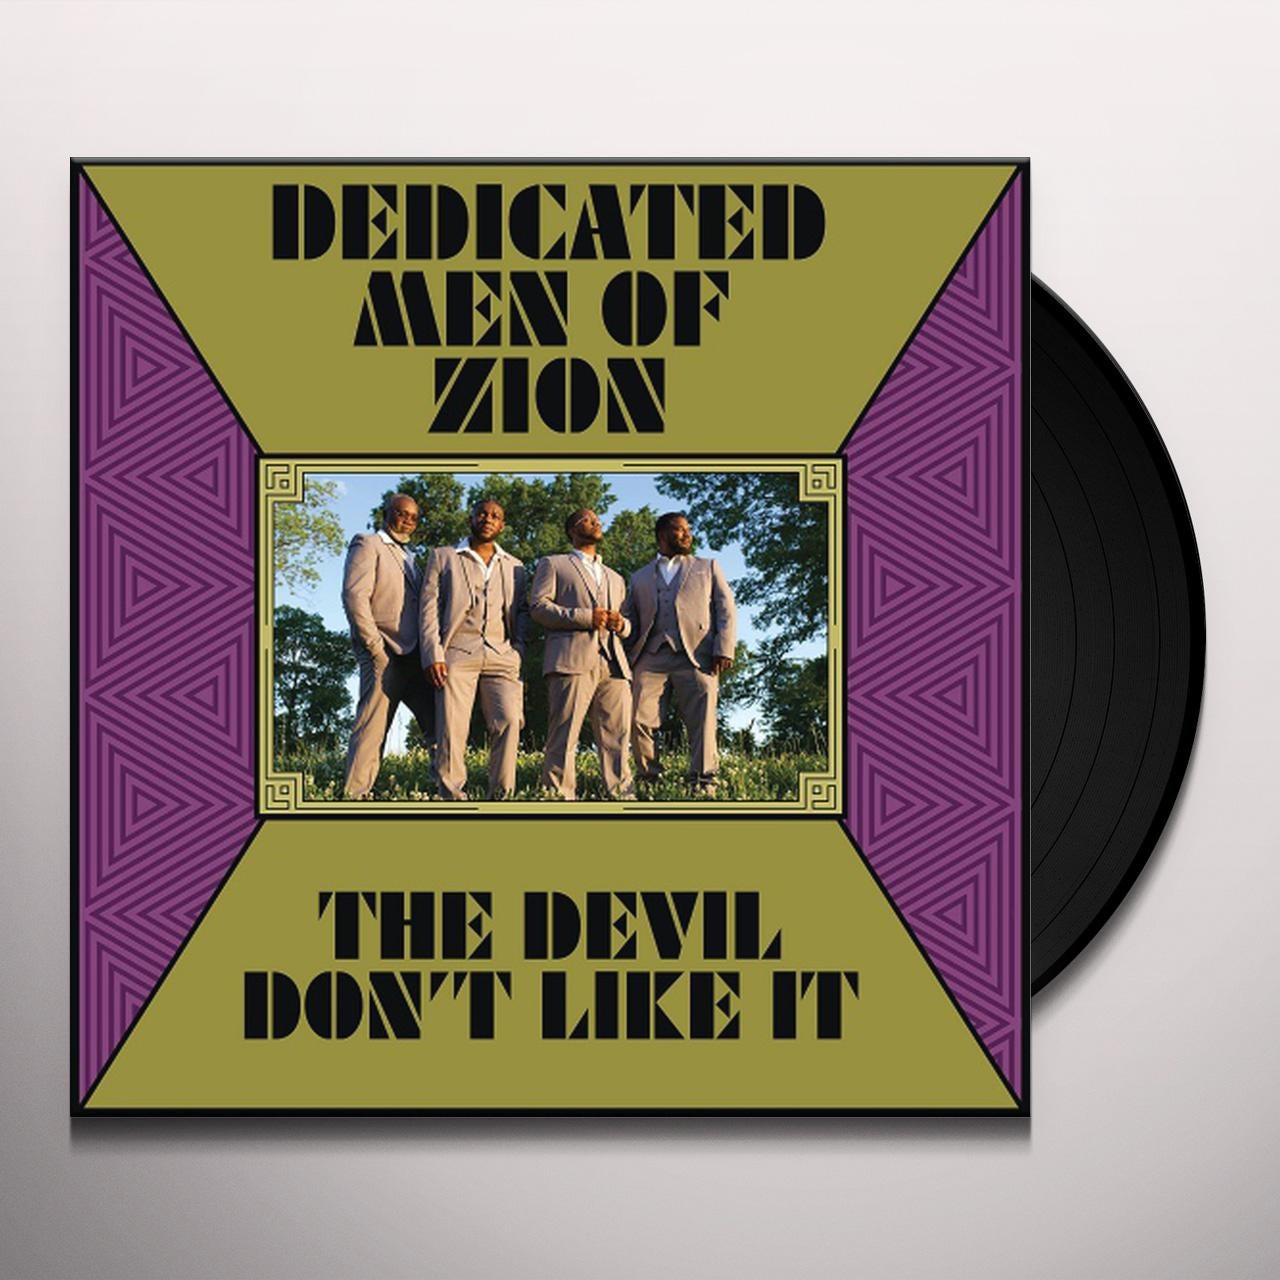 Dedicated Men of Zion - The Devil Don't Like It - Blind Tiger Record Club